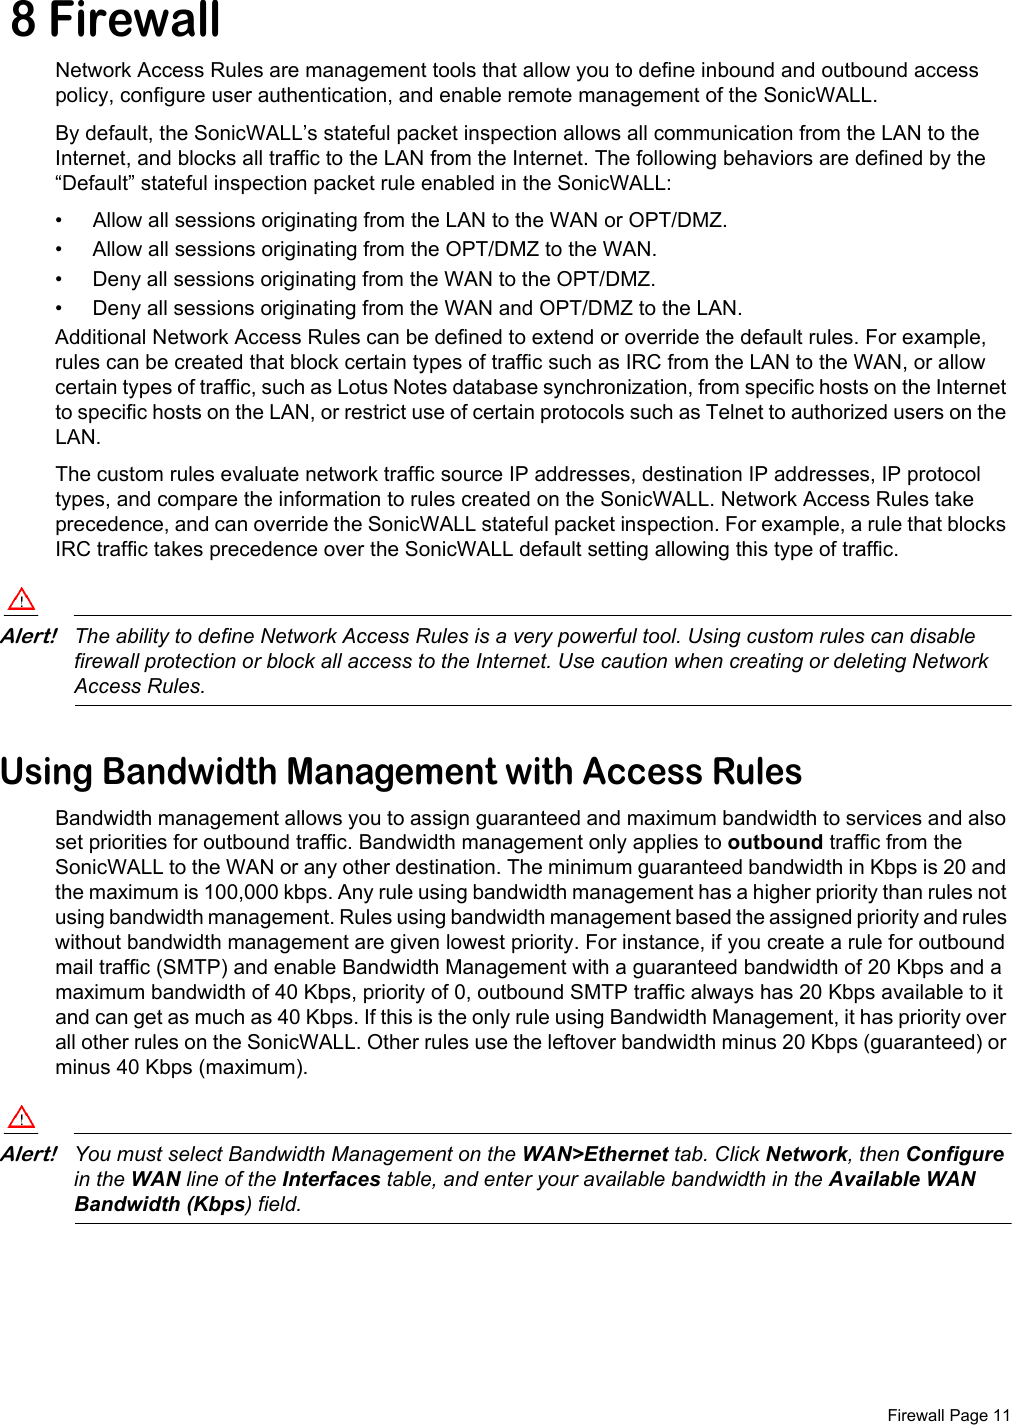  Firewall Page 11 8 FirewallNetwork Access Rules are management tools that allow you to define inbound and outbound access policy, configure user authentication, and enable remote management of the SonicWALL. By default, the SonicWALL’s stateful packet inspection allows all communication from the LAN to the Internet, and blocks all traffic to the LAN from the Internet. The following behaviors are defined by the “Default” stateful inspection packet rule enabled in the SonicWALL:• Allow all sessions originating from the LAN to the WAN or OPT/DMZ.• Allow all sessions originating from the OPT/DMZ to the WAN.• Deny all sessions originating from the WAN to the OPT/DMZ. • Deny all sessions originating from the WAN and OPT/DMZ to the LAN.Additional Network Access Rules can be defined to extend or override the default rules. For example, rules can be created that block certain types of traffic such as IRC from the LAN to the WAN, or allow certain types of traffic, such as Lotus Notes database synchronization, from specific hosts on the Internet to specific hosts on the LAN, or restrict use of certain protocols such as Telnet to authorized users on the LAN. The custom rules evaluate network traffic source IP addresses, destination IP addresses, IP protocol types, and compare the information to rules created on the SonicWALL. Network Access Rules take precedence, and can override the SonicWALL stateful packet inspection. For example, a rule that blocks IRC traffic takes precedence over the SonicWALL default setting allowing this type of traffic. Alert!The ability to define Network Access Rules is a very powerful tool. Using custom rules can disable firewall protection or block all access to the Internet. Use caution when creating or deleting Network Access Rules.Using Bandwidth Management with Access RulesBandwidth management allows you to assign guaranteed and maximum bandwidth to services and also set priorities for outbound traffic. Bandwidth management only applies to outbound traffic from the SonicWALL to the WAN or any other destination. The minimum guaranteed bandwidth in Kbps is 20 and the maximum is 100,000 kbps. Any rule using bandwidth management has a higher priority than rules not using bandwidth management. Rules using bandwidth management based the assigned priority and rules without bandwidth management are given lowest priority. For instance, if you create a rule for outbound mail traffic (SMTP) and enable Bandwidth Management with a guaranteed bandwidth of 20 Kbps and a maximum bandwidth of 40 Kbps, priority of 0, outbound SMTP traffic always has 20 Kbps available to it and can get as much as 40 Kbps. If this is the only rule using Bandwidth Management, it has priority over all other rules on the SonicWALL. Other rules use the leftover bandwidth minus 20 Kbps (guaranteed) or minus 40 Kbps (maximum). Alert!You must select Bandwidth Management on the WAN&gt;Ethernet tab. Click Network, then Configure in the WAN line of the Interfaces table, and enter your available bandwidth in the Available WAN Bandwidth (Kbps) field. 